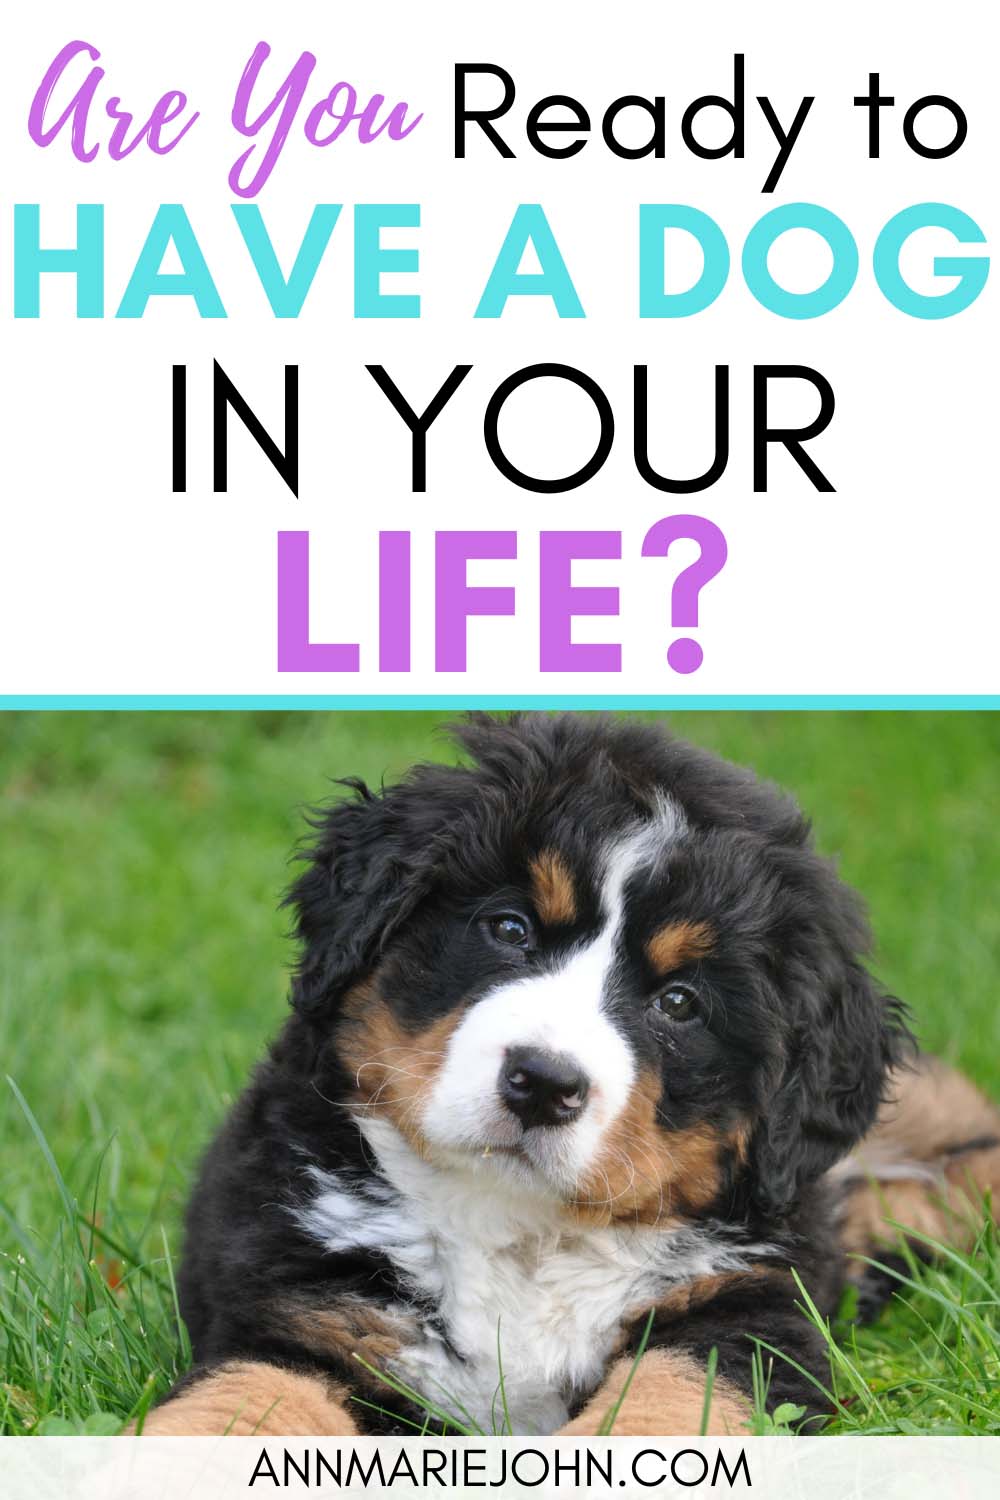 Are You Ready To Have A Dog In Your Life?